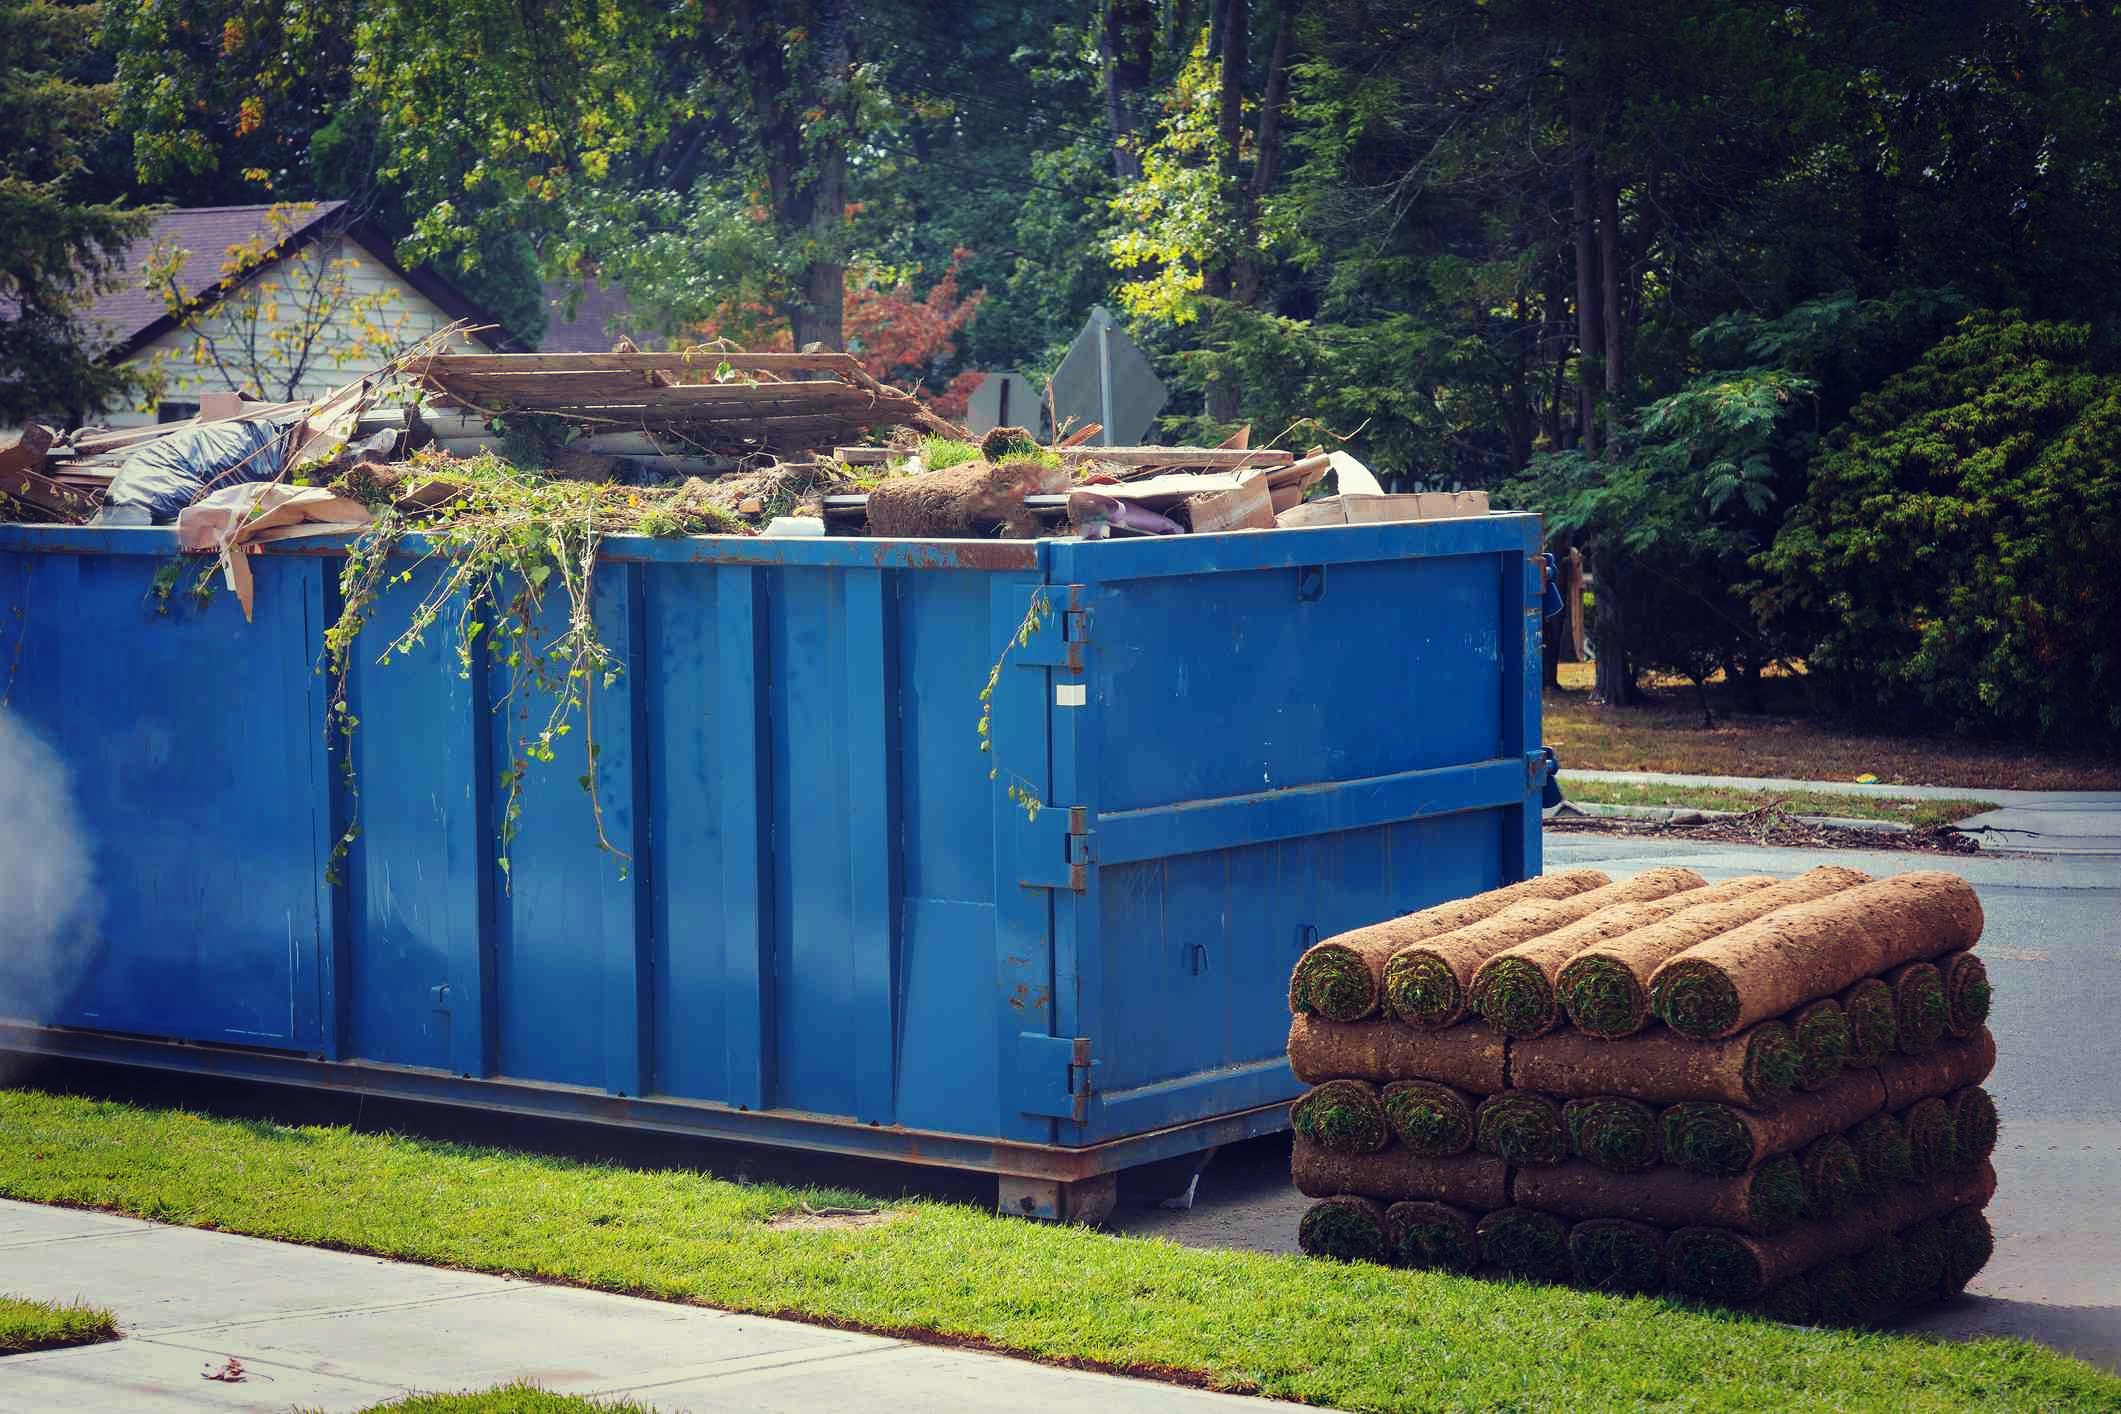 No Dumpster Needed: Donate These 10 Things to Habitat for Humanity After Remodeling